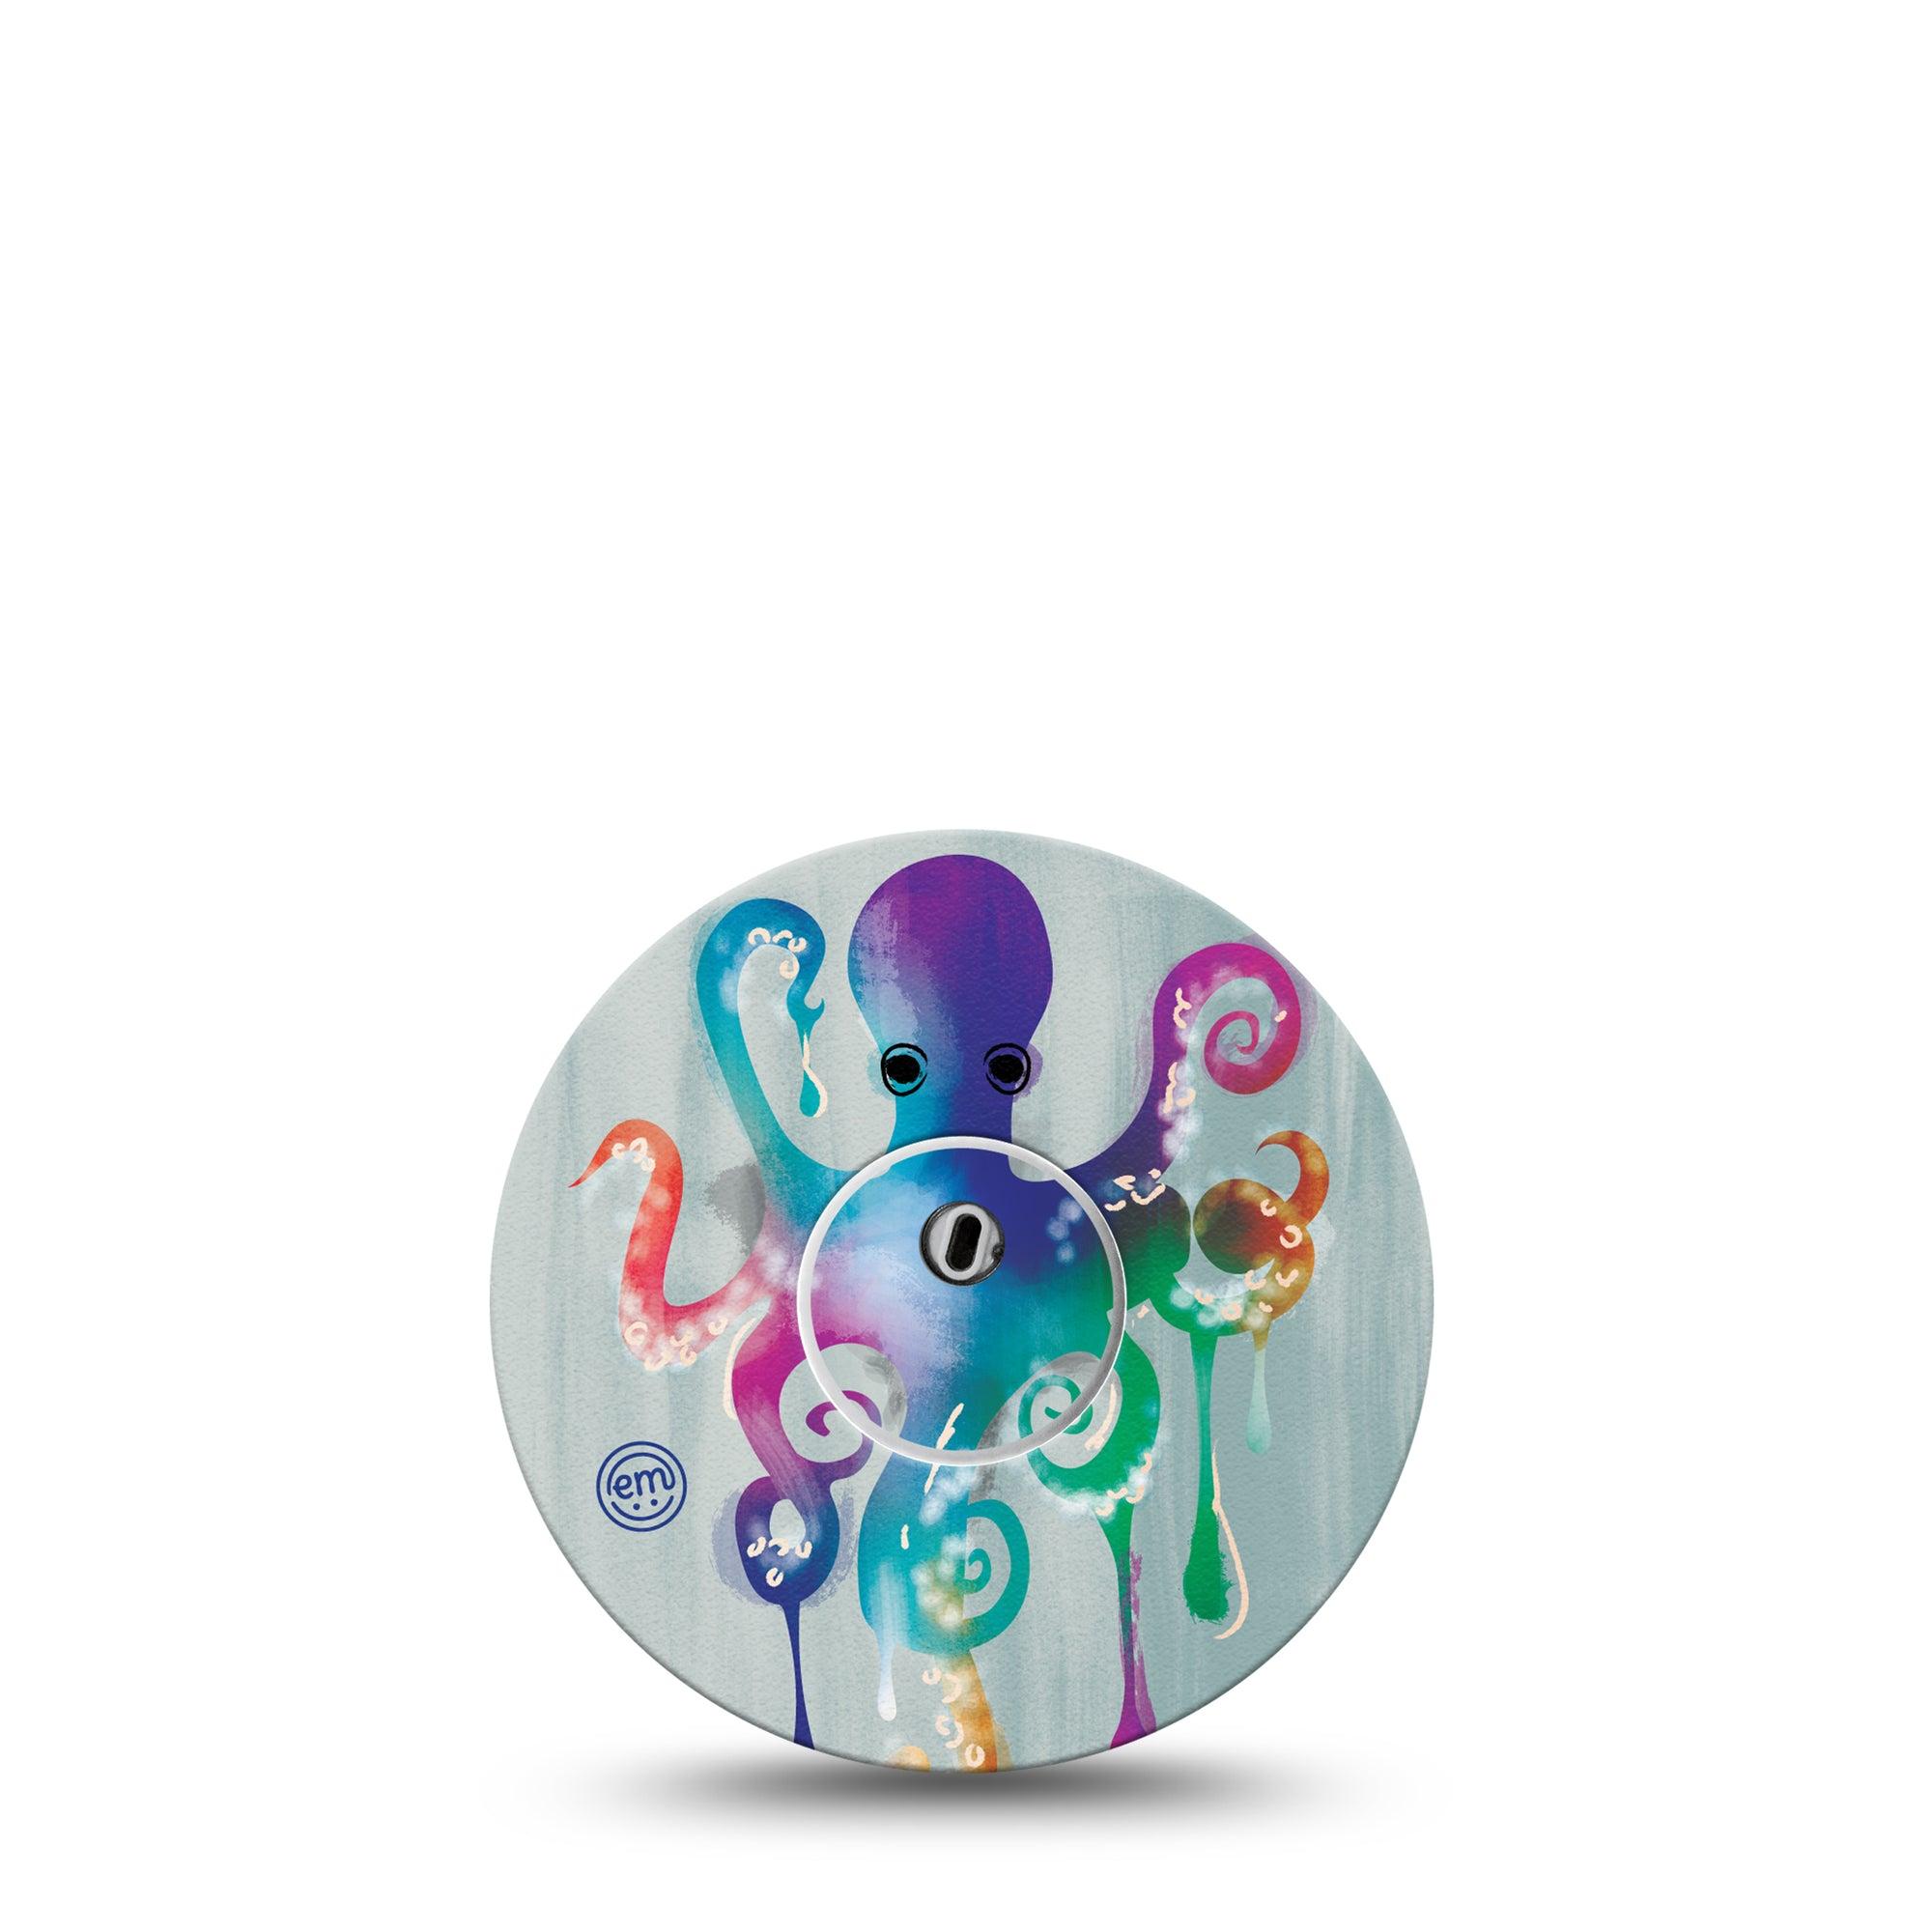 ExpressionMed Libre 3 Transmitter Sticker Colorful Sea Creature Themed Design, Vinyl Tape and Sticker